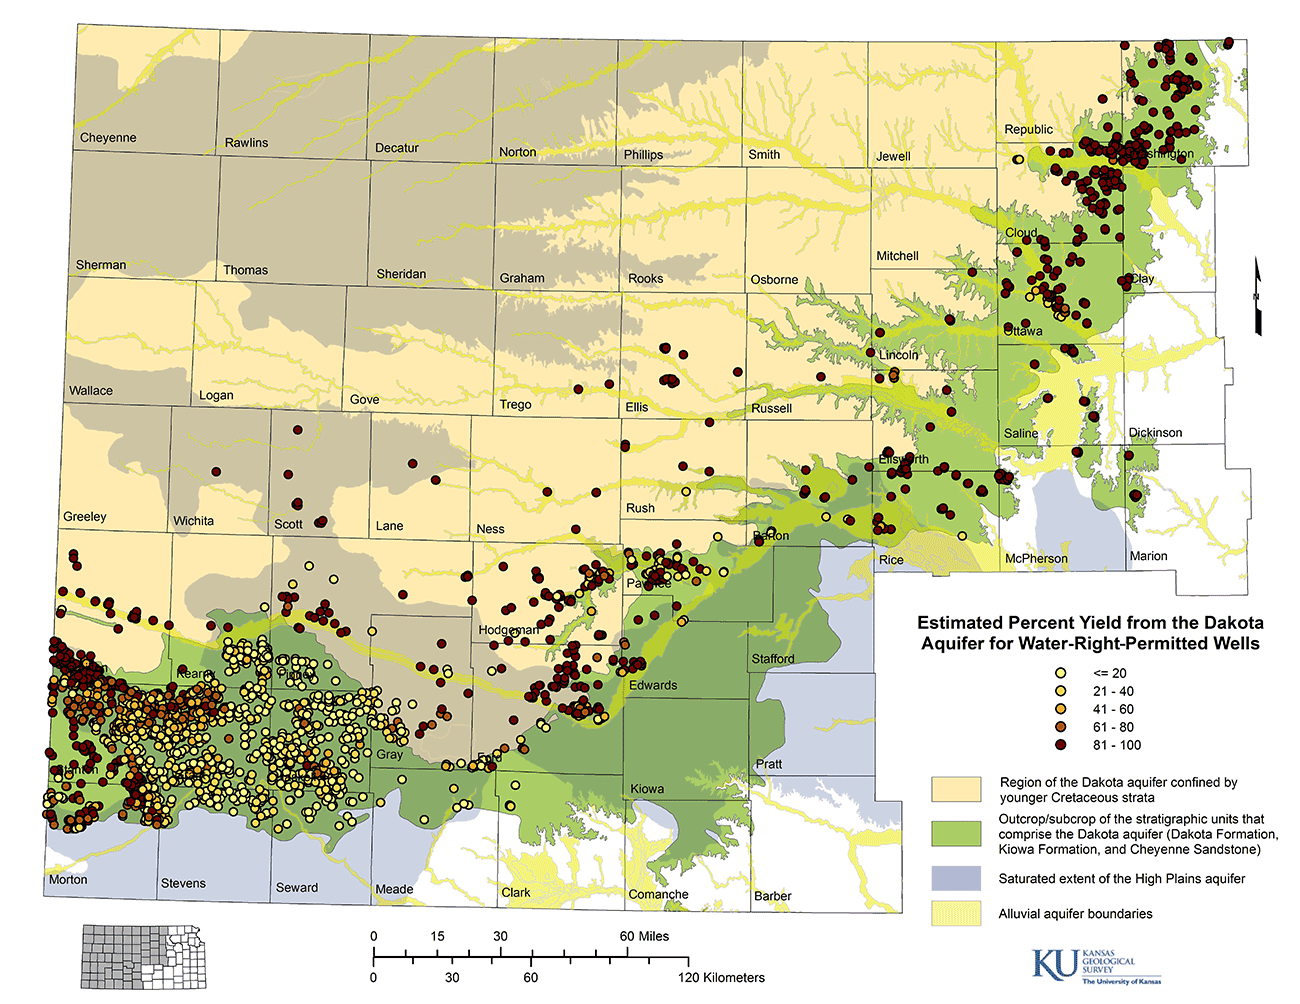 Producing wells generaly found along southern and eastern border of aquifer.